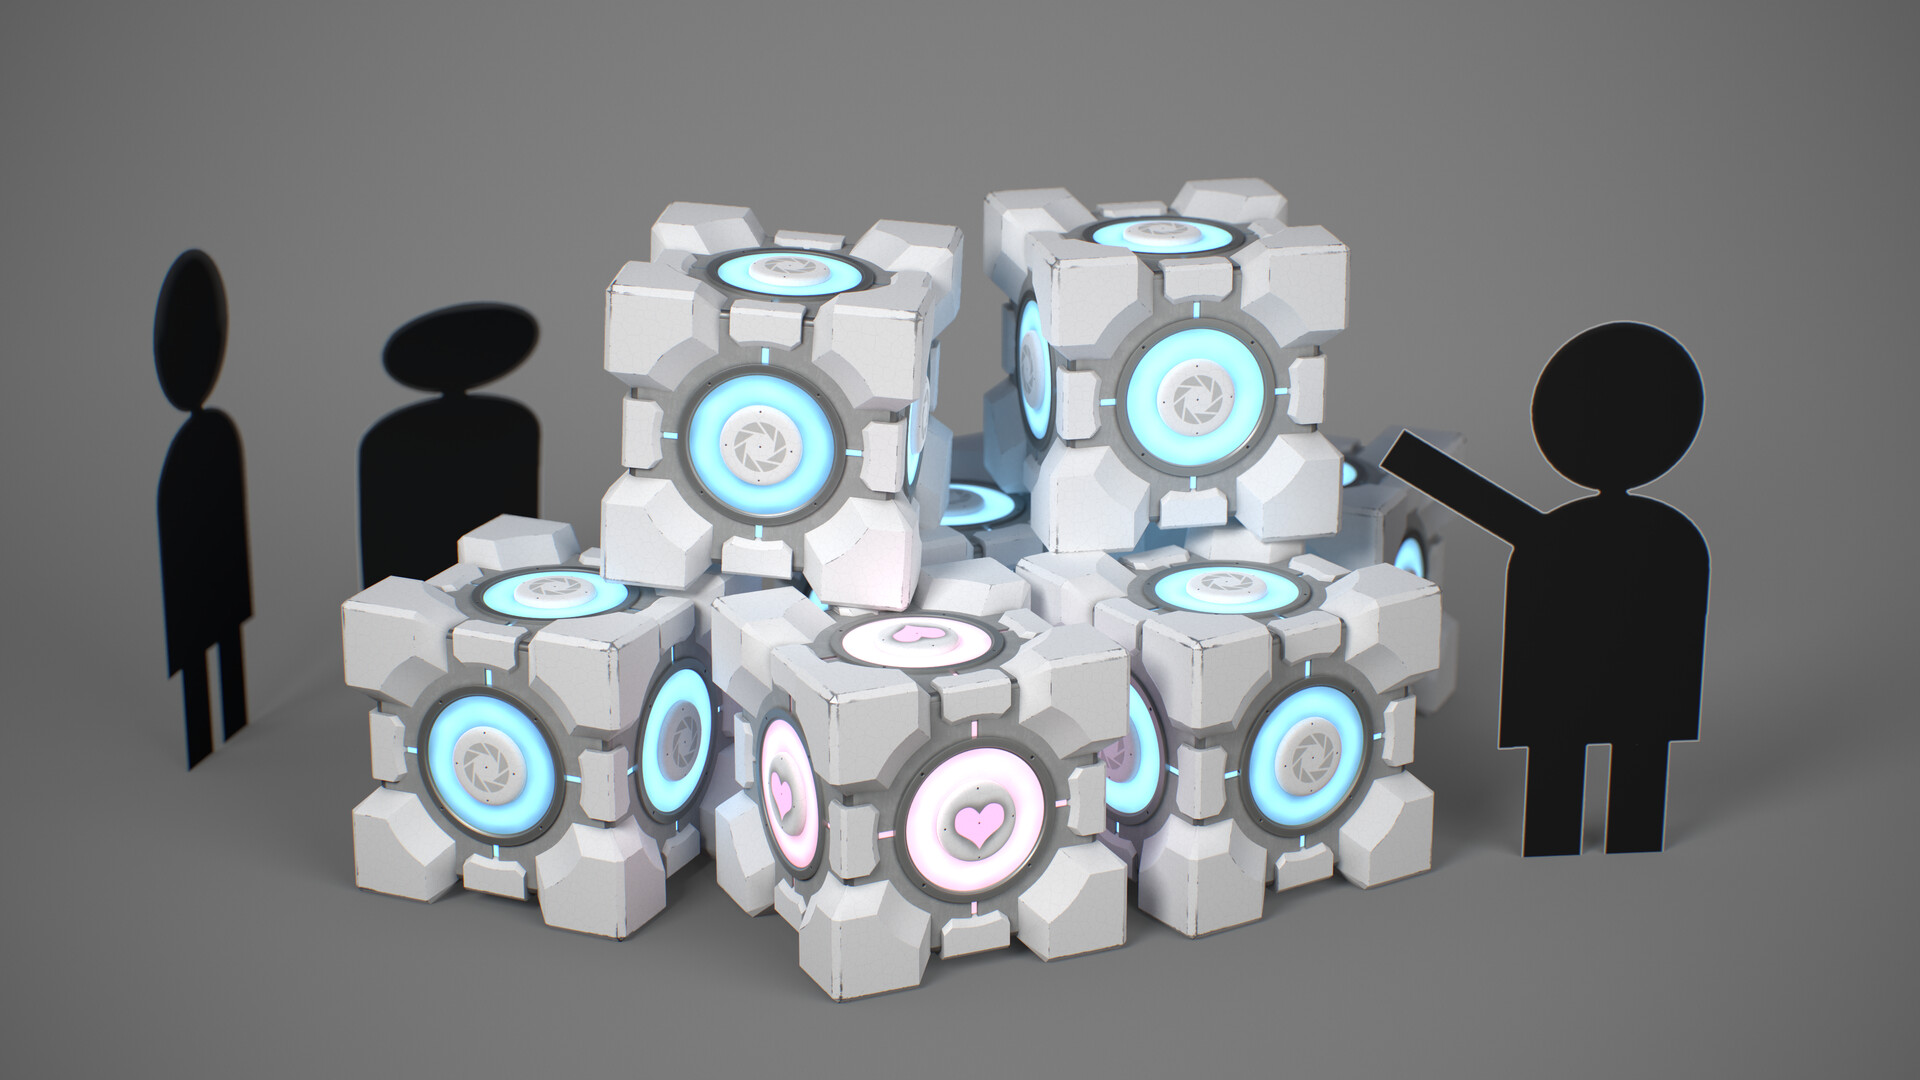 ArtStation - Aperture science Weighted companion cube